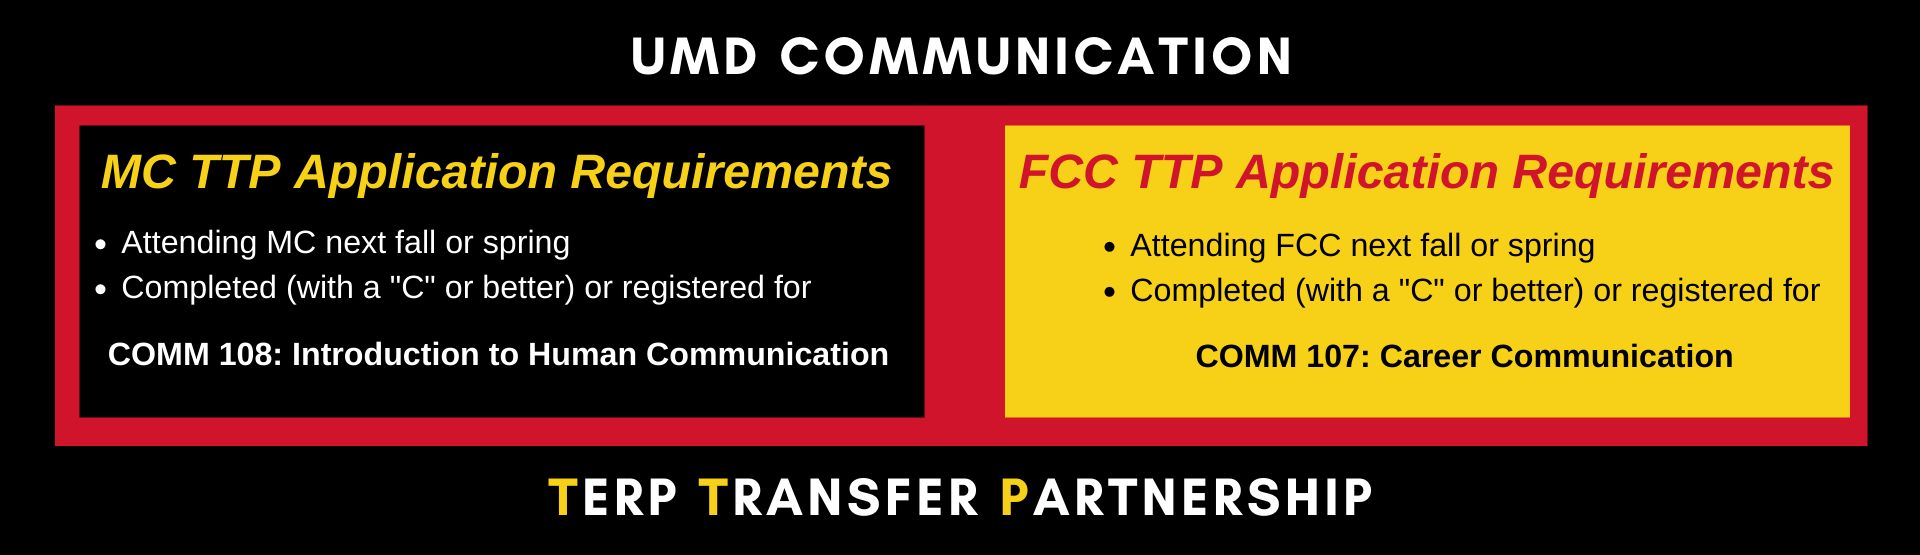 TTP Communication Application Requirements for MC and FCC students